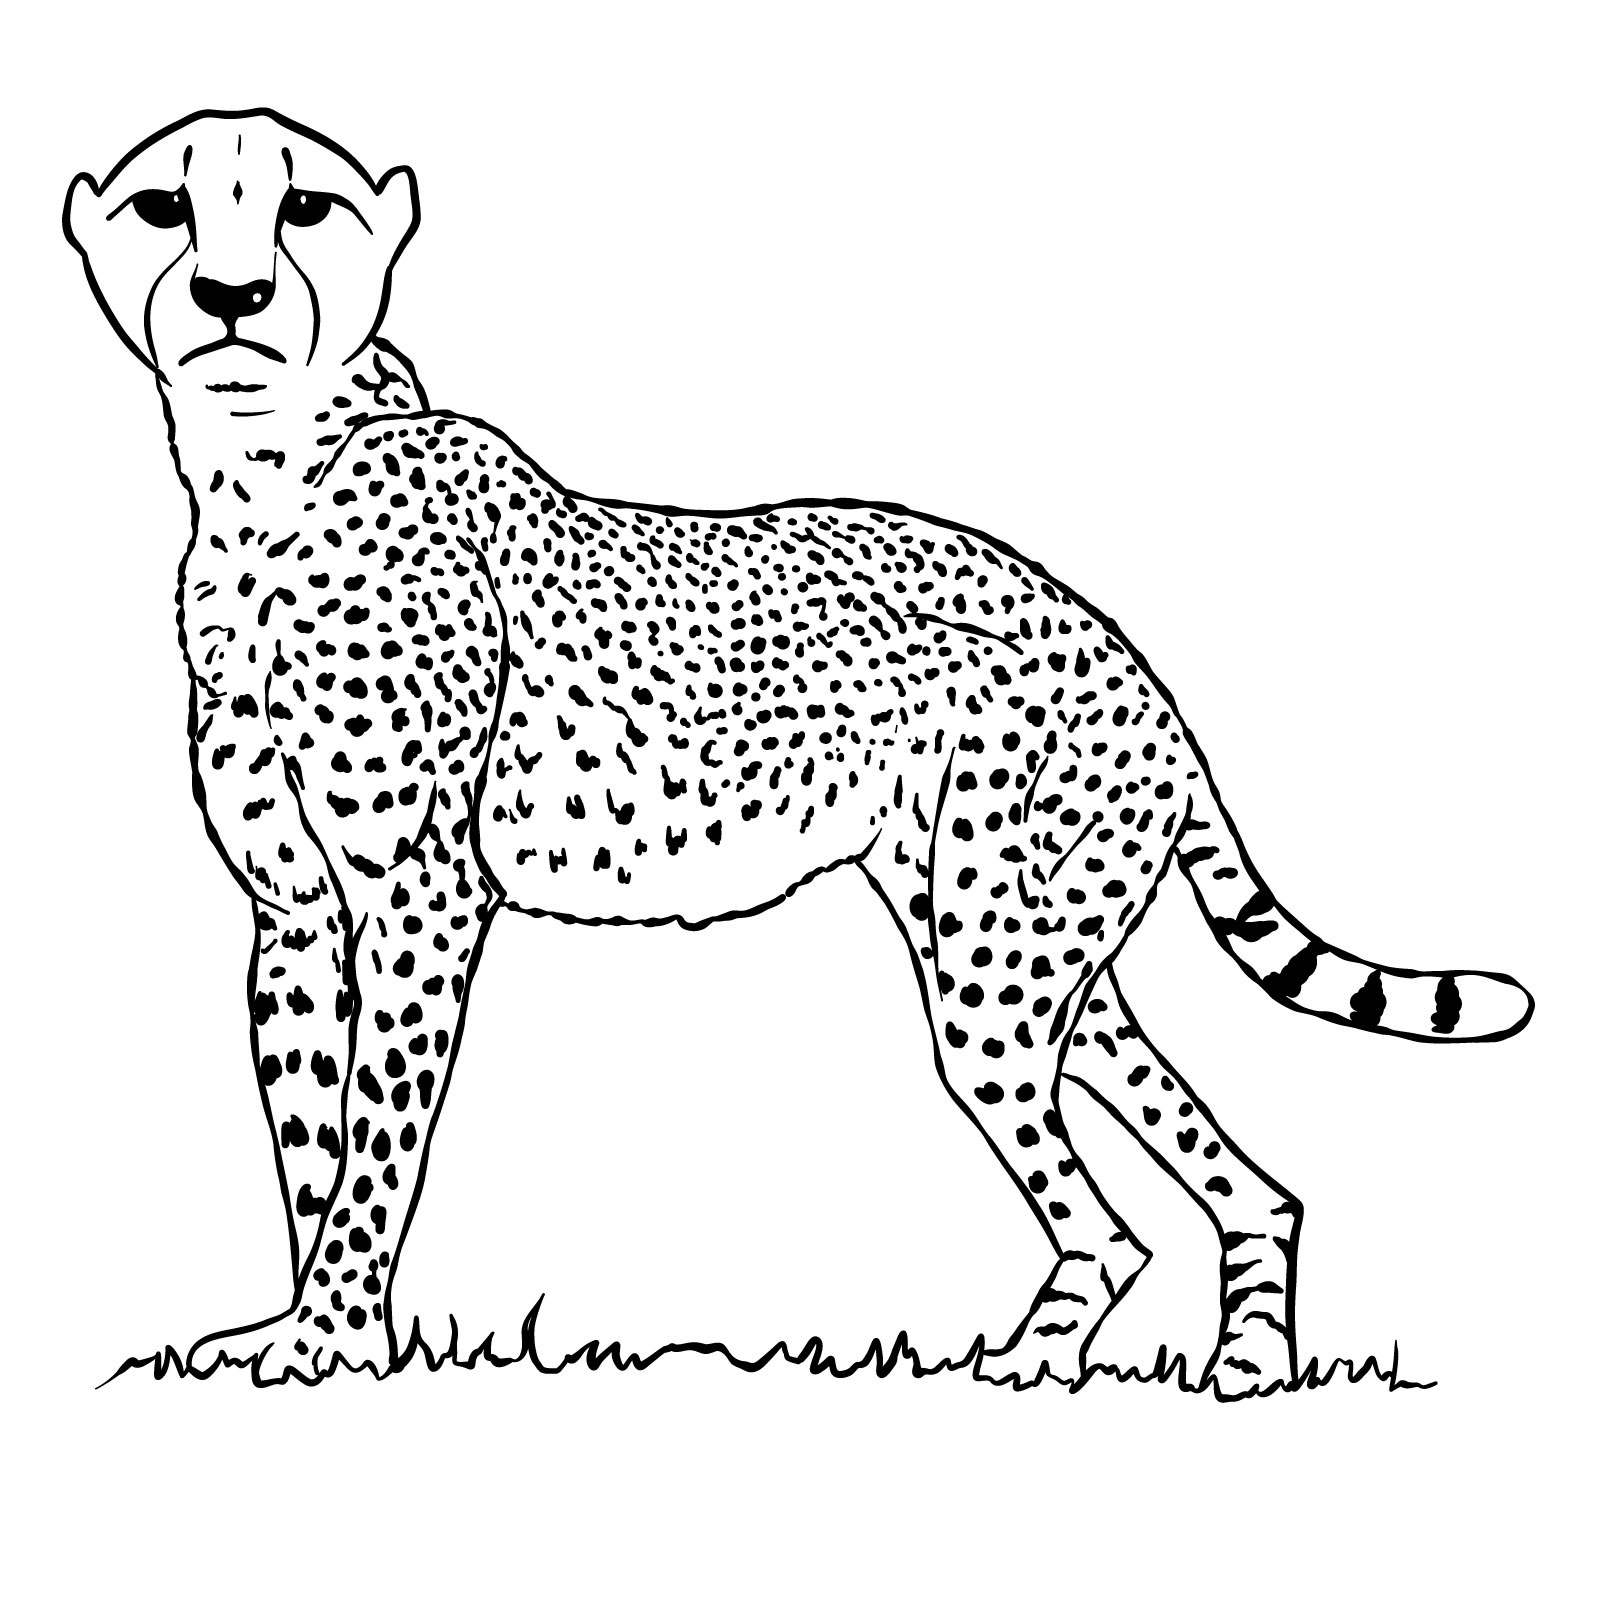 How to draw a Cheetah - Sketchok easy drawing guides